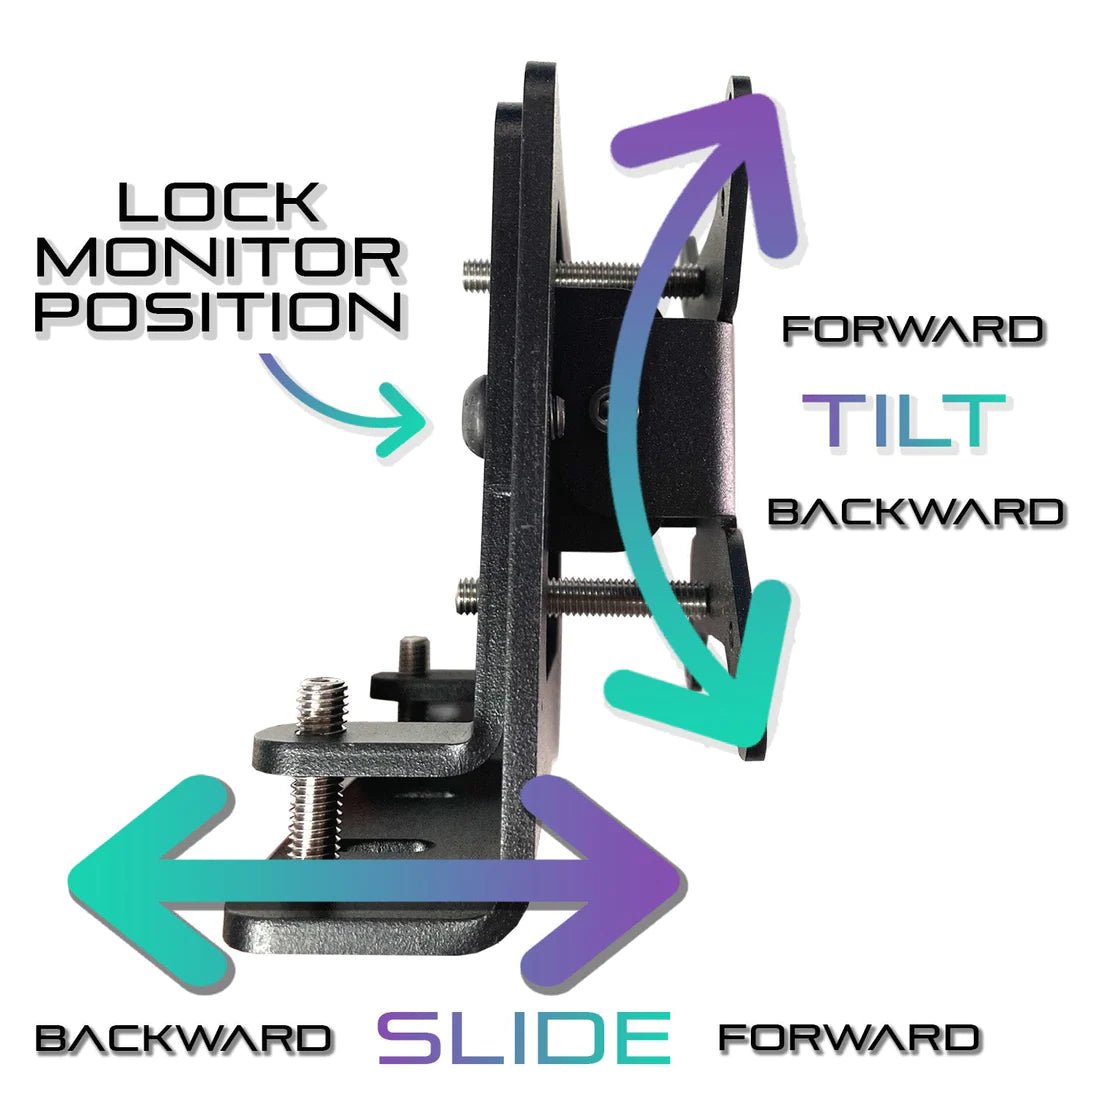 Advanced Sim Racing Free-Standing Triple Monitor Stand (Up to 32")